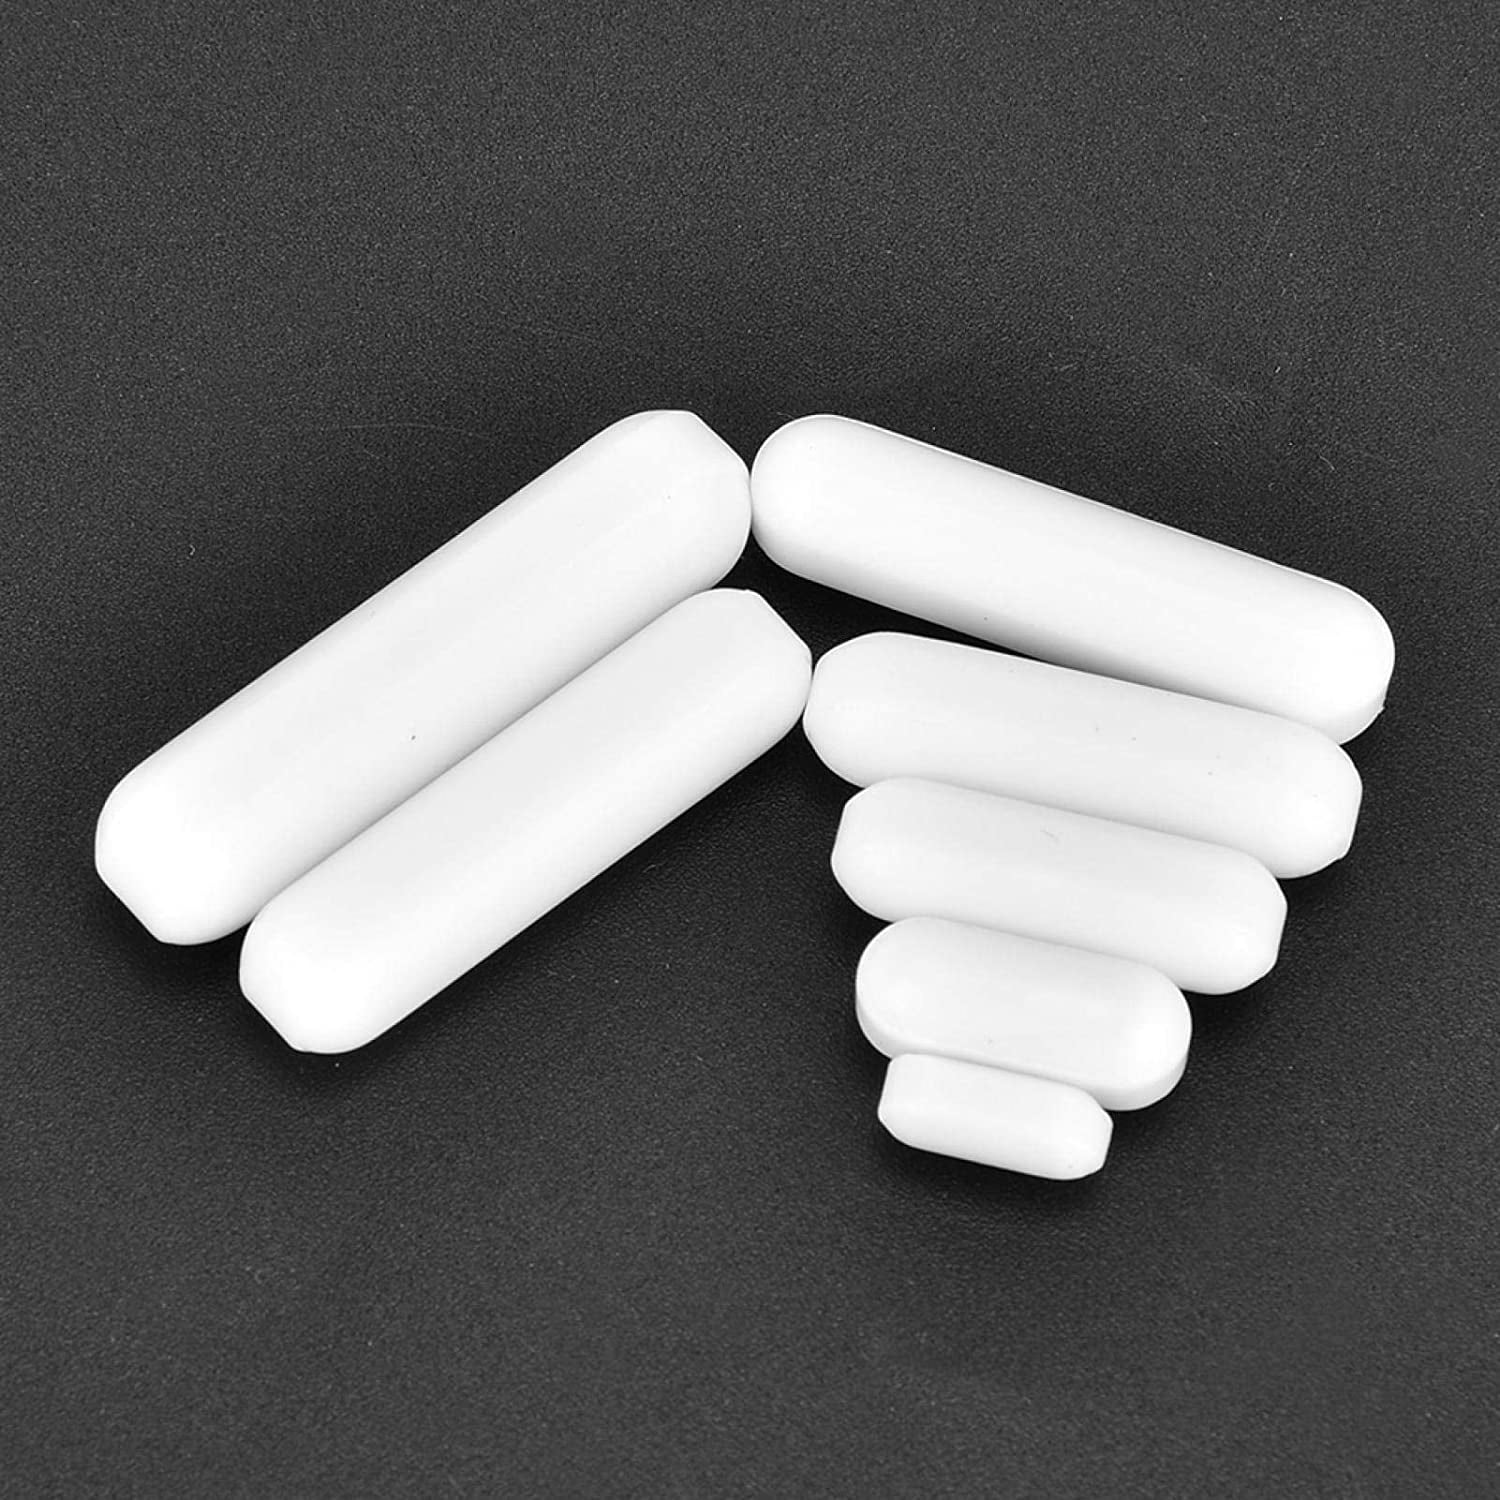 Type C Stir Bar Strong Magnetic and Non-Toxic 7pcs Magnetic Stirrer Mixer Type C Stir Bars Laboratory PTFE Stirring Rod